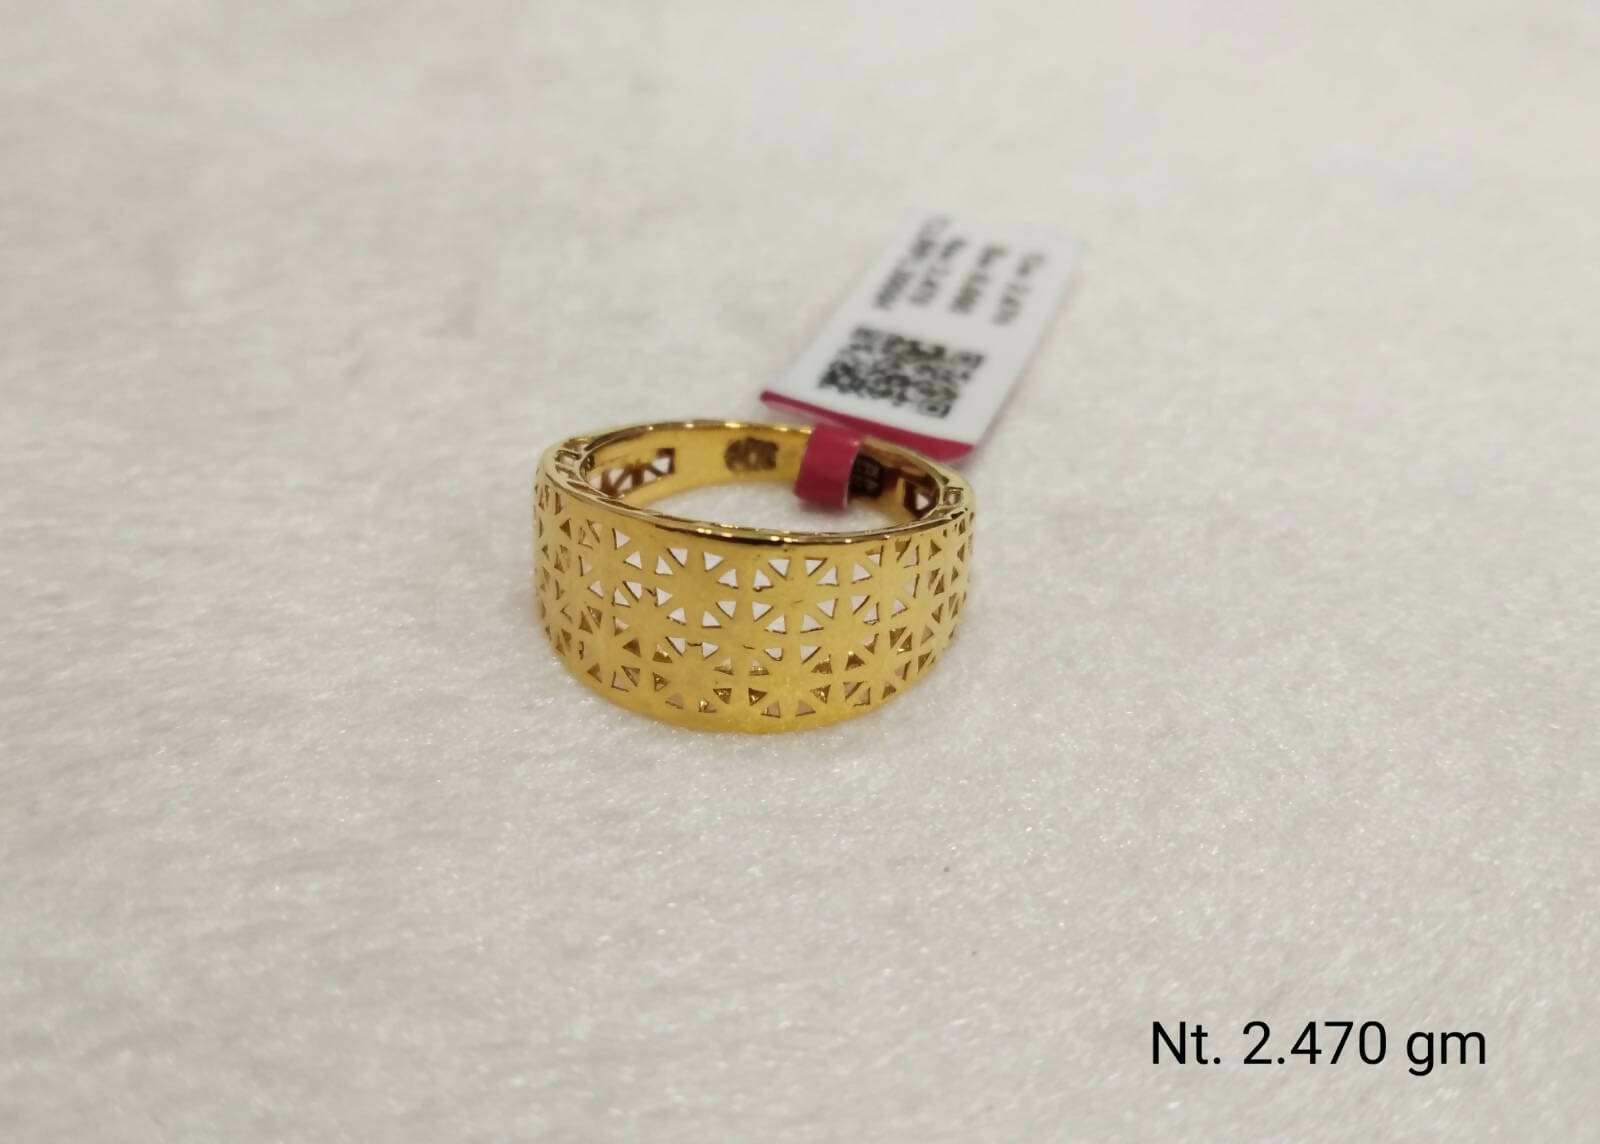 Italian Gold Stylish Ring Price Starting From Rs 18,720/Unit | Find  Verified Sellers at Justdial